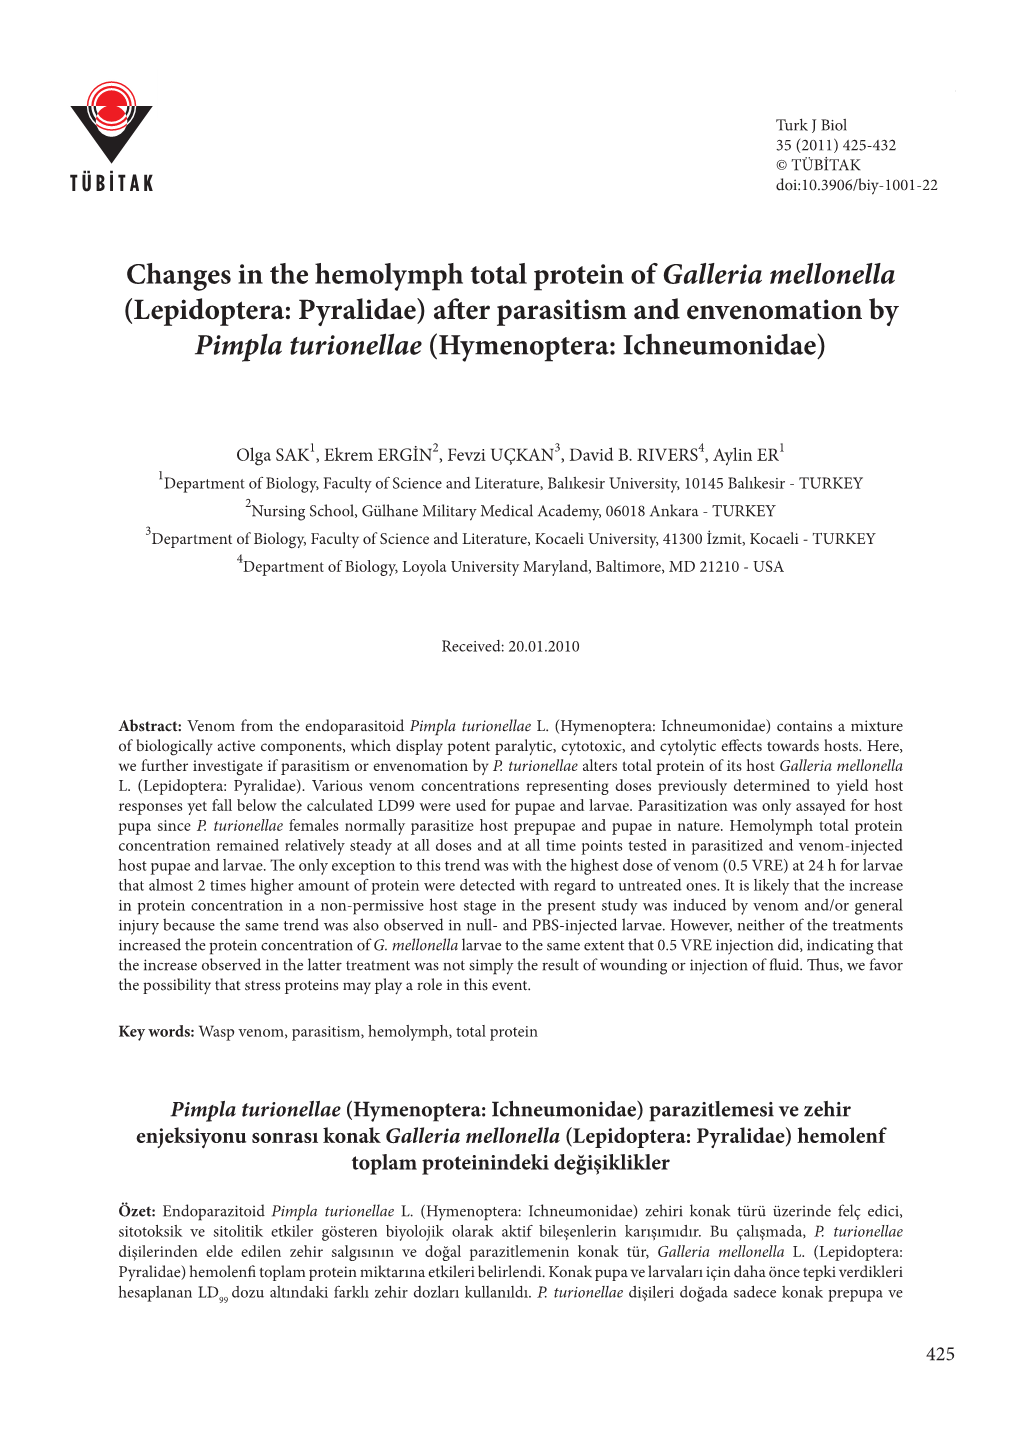 Changes in the Hemolymph Total Protein of Galleria Mellonella